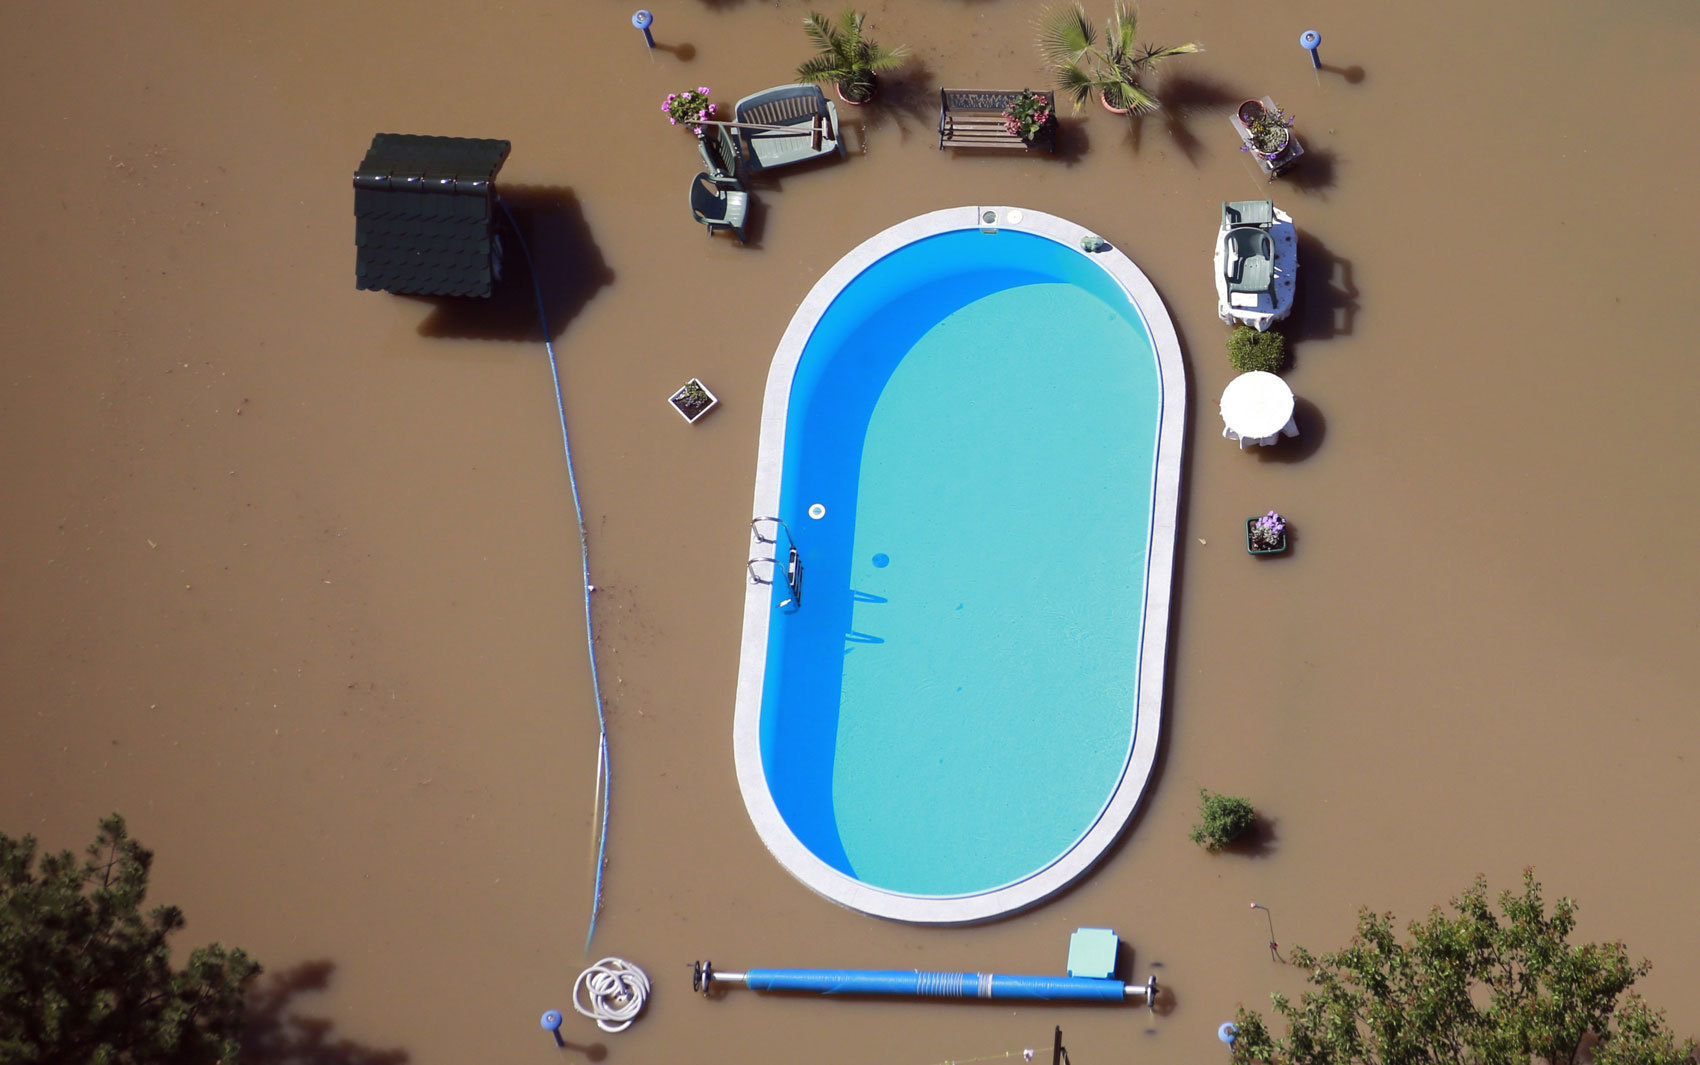 Flooding everything – except the pool, of course.